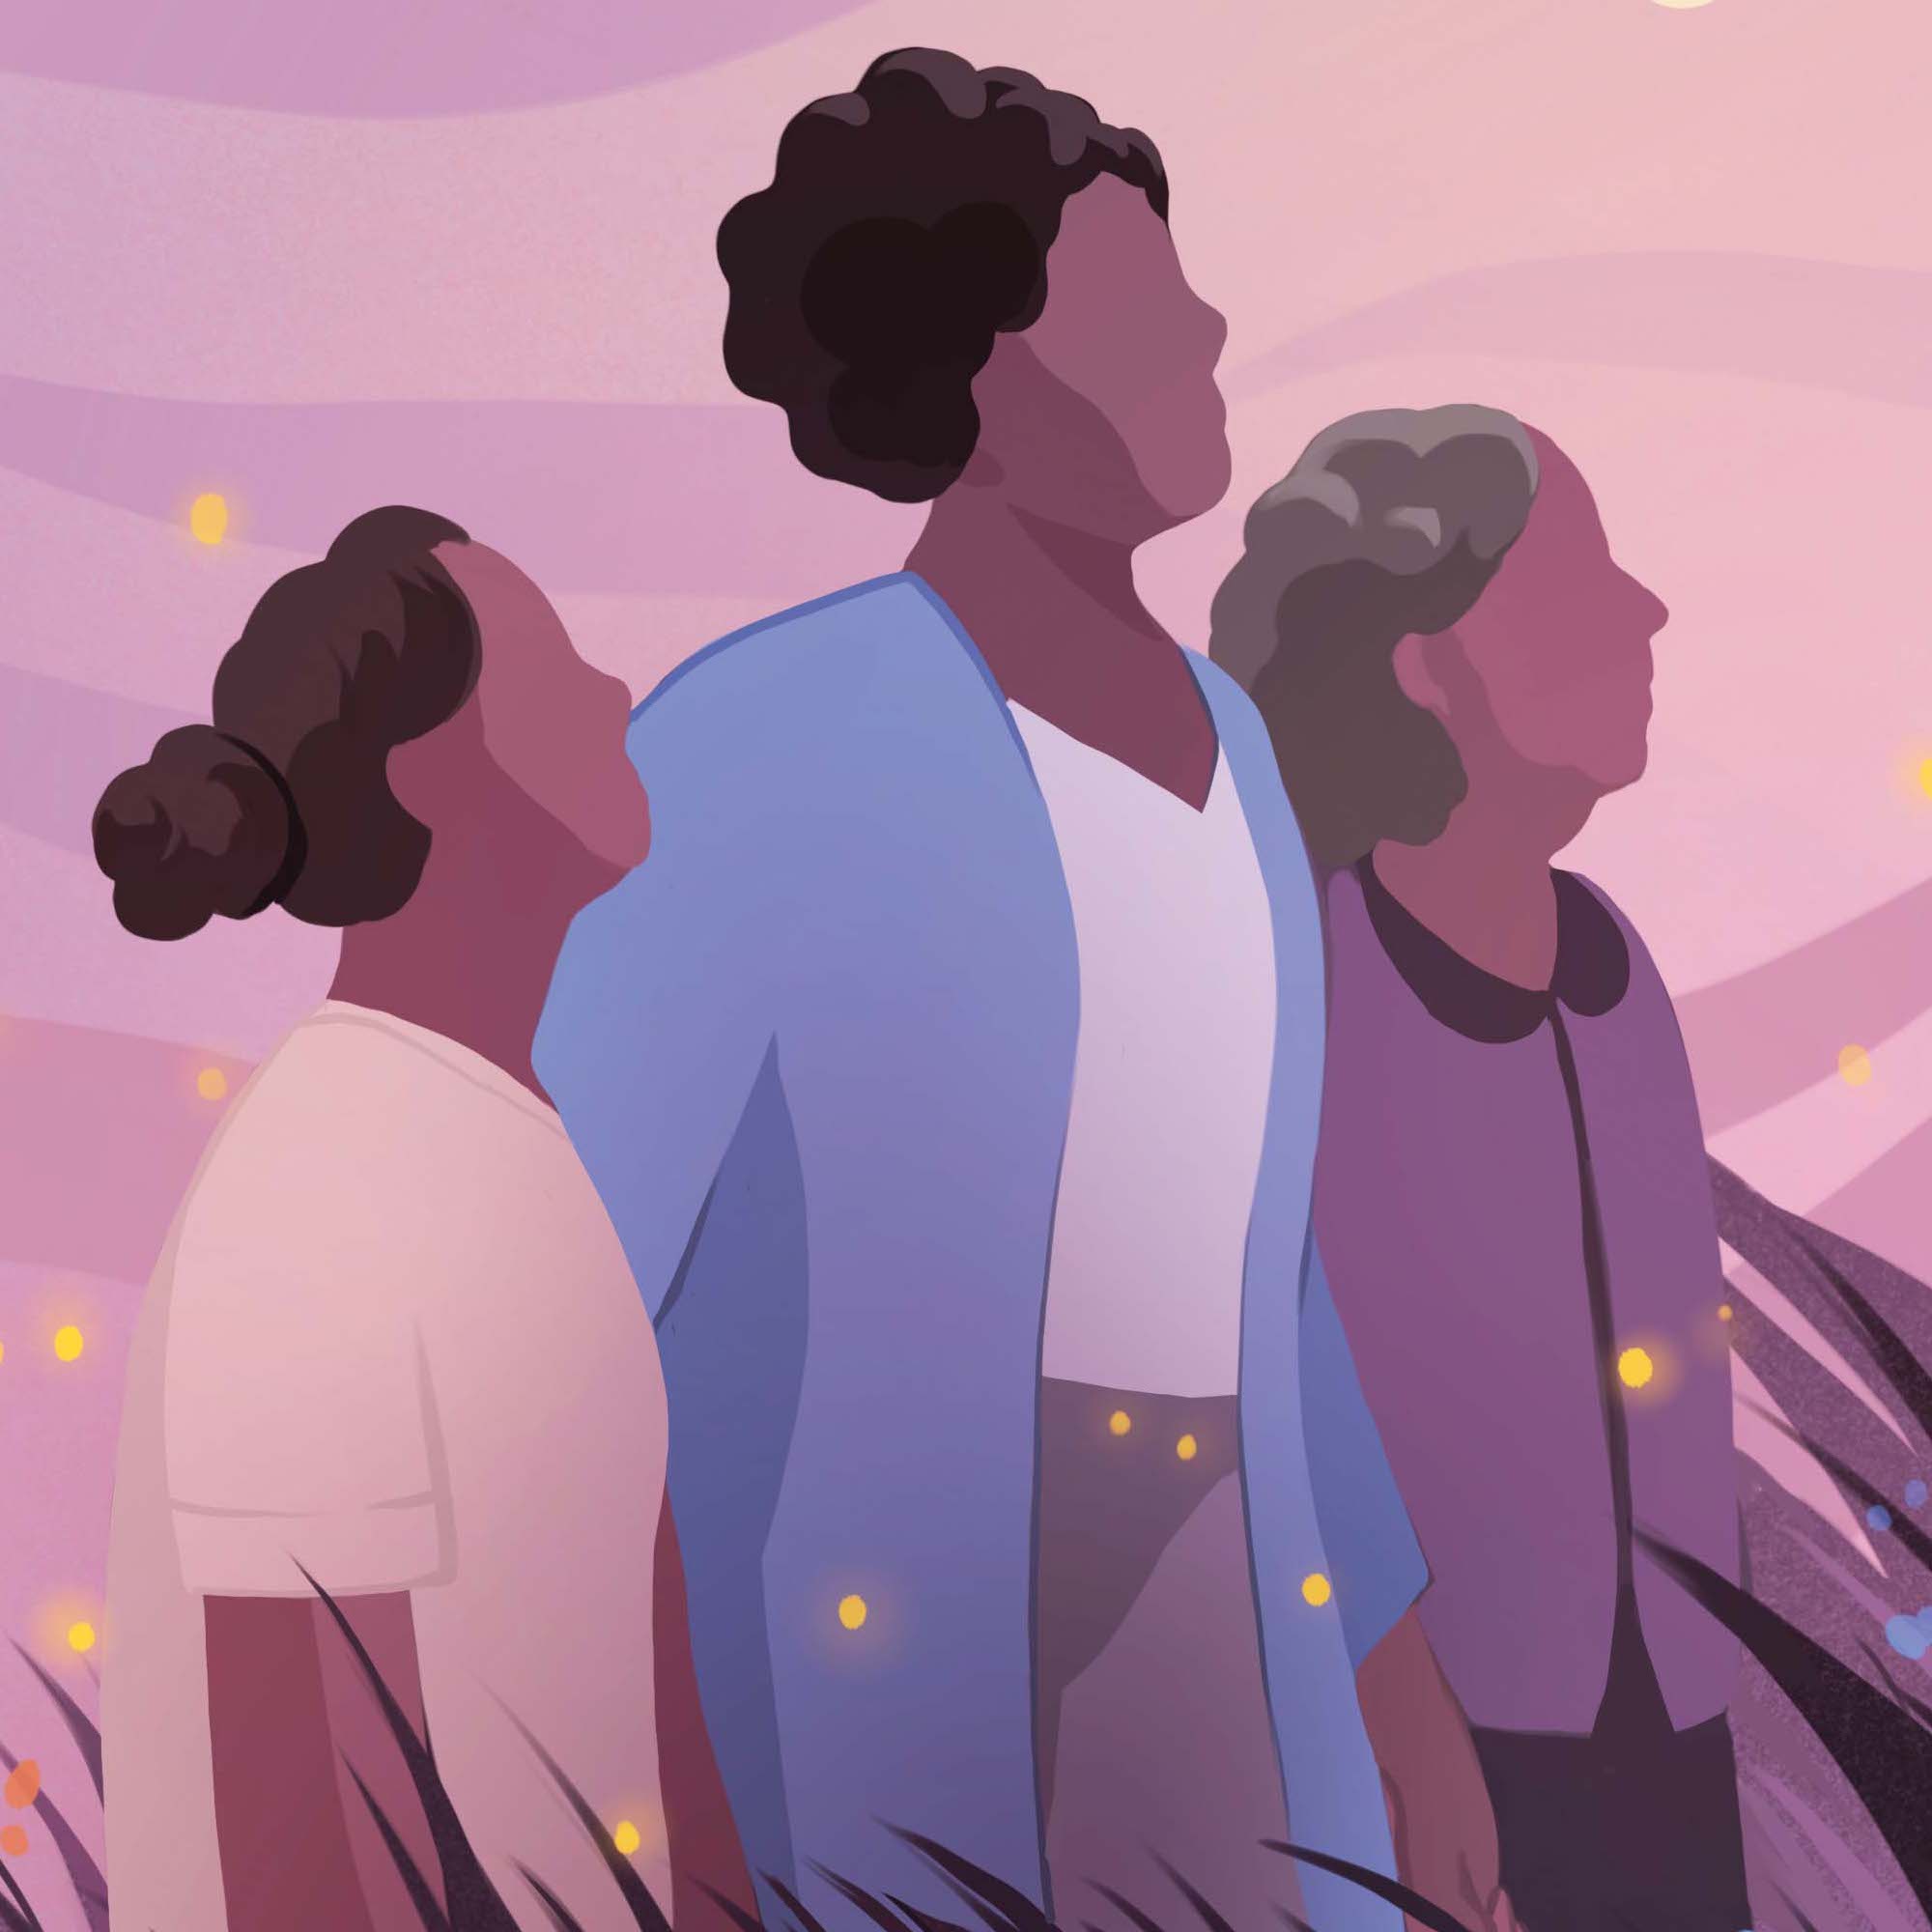 Illustration of three generations of women staring into the future. At the Masonic Center for Youth and Families, counselors are able to work with the entire family to help forge new beginnings in the wake of trauma or crisis.